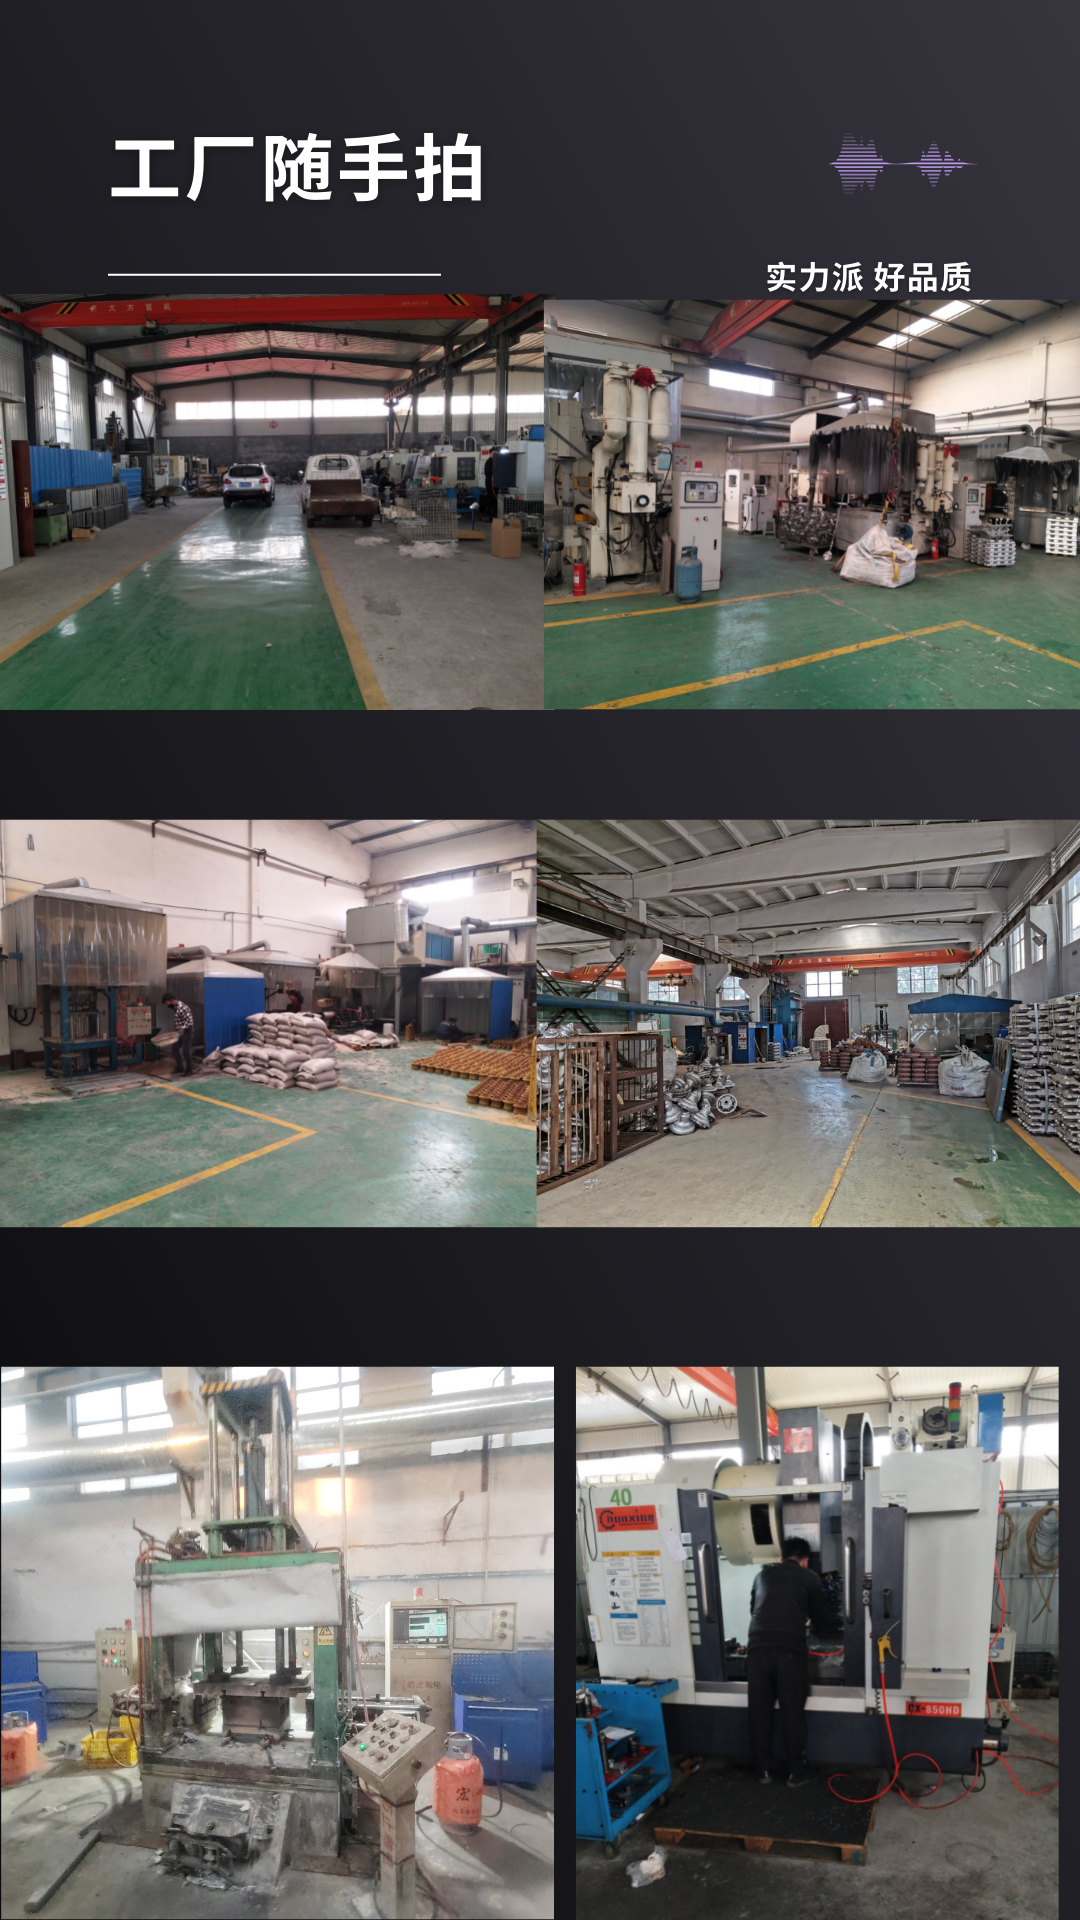 Low pressure casting process for Jiajie aluminum alloy bracket and aluminum parts T6 solid solution heat treatment X-ray inspection